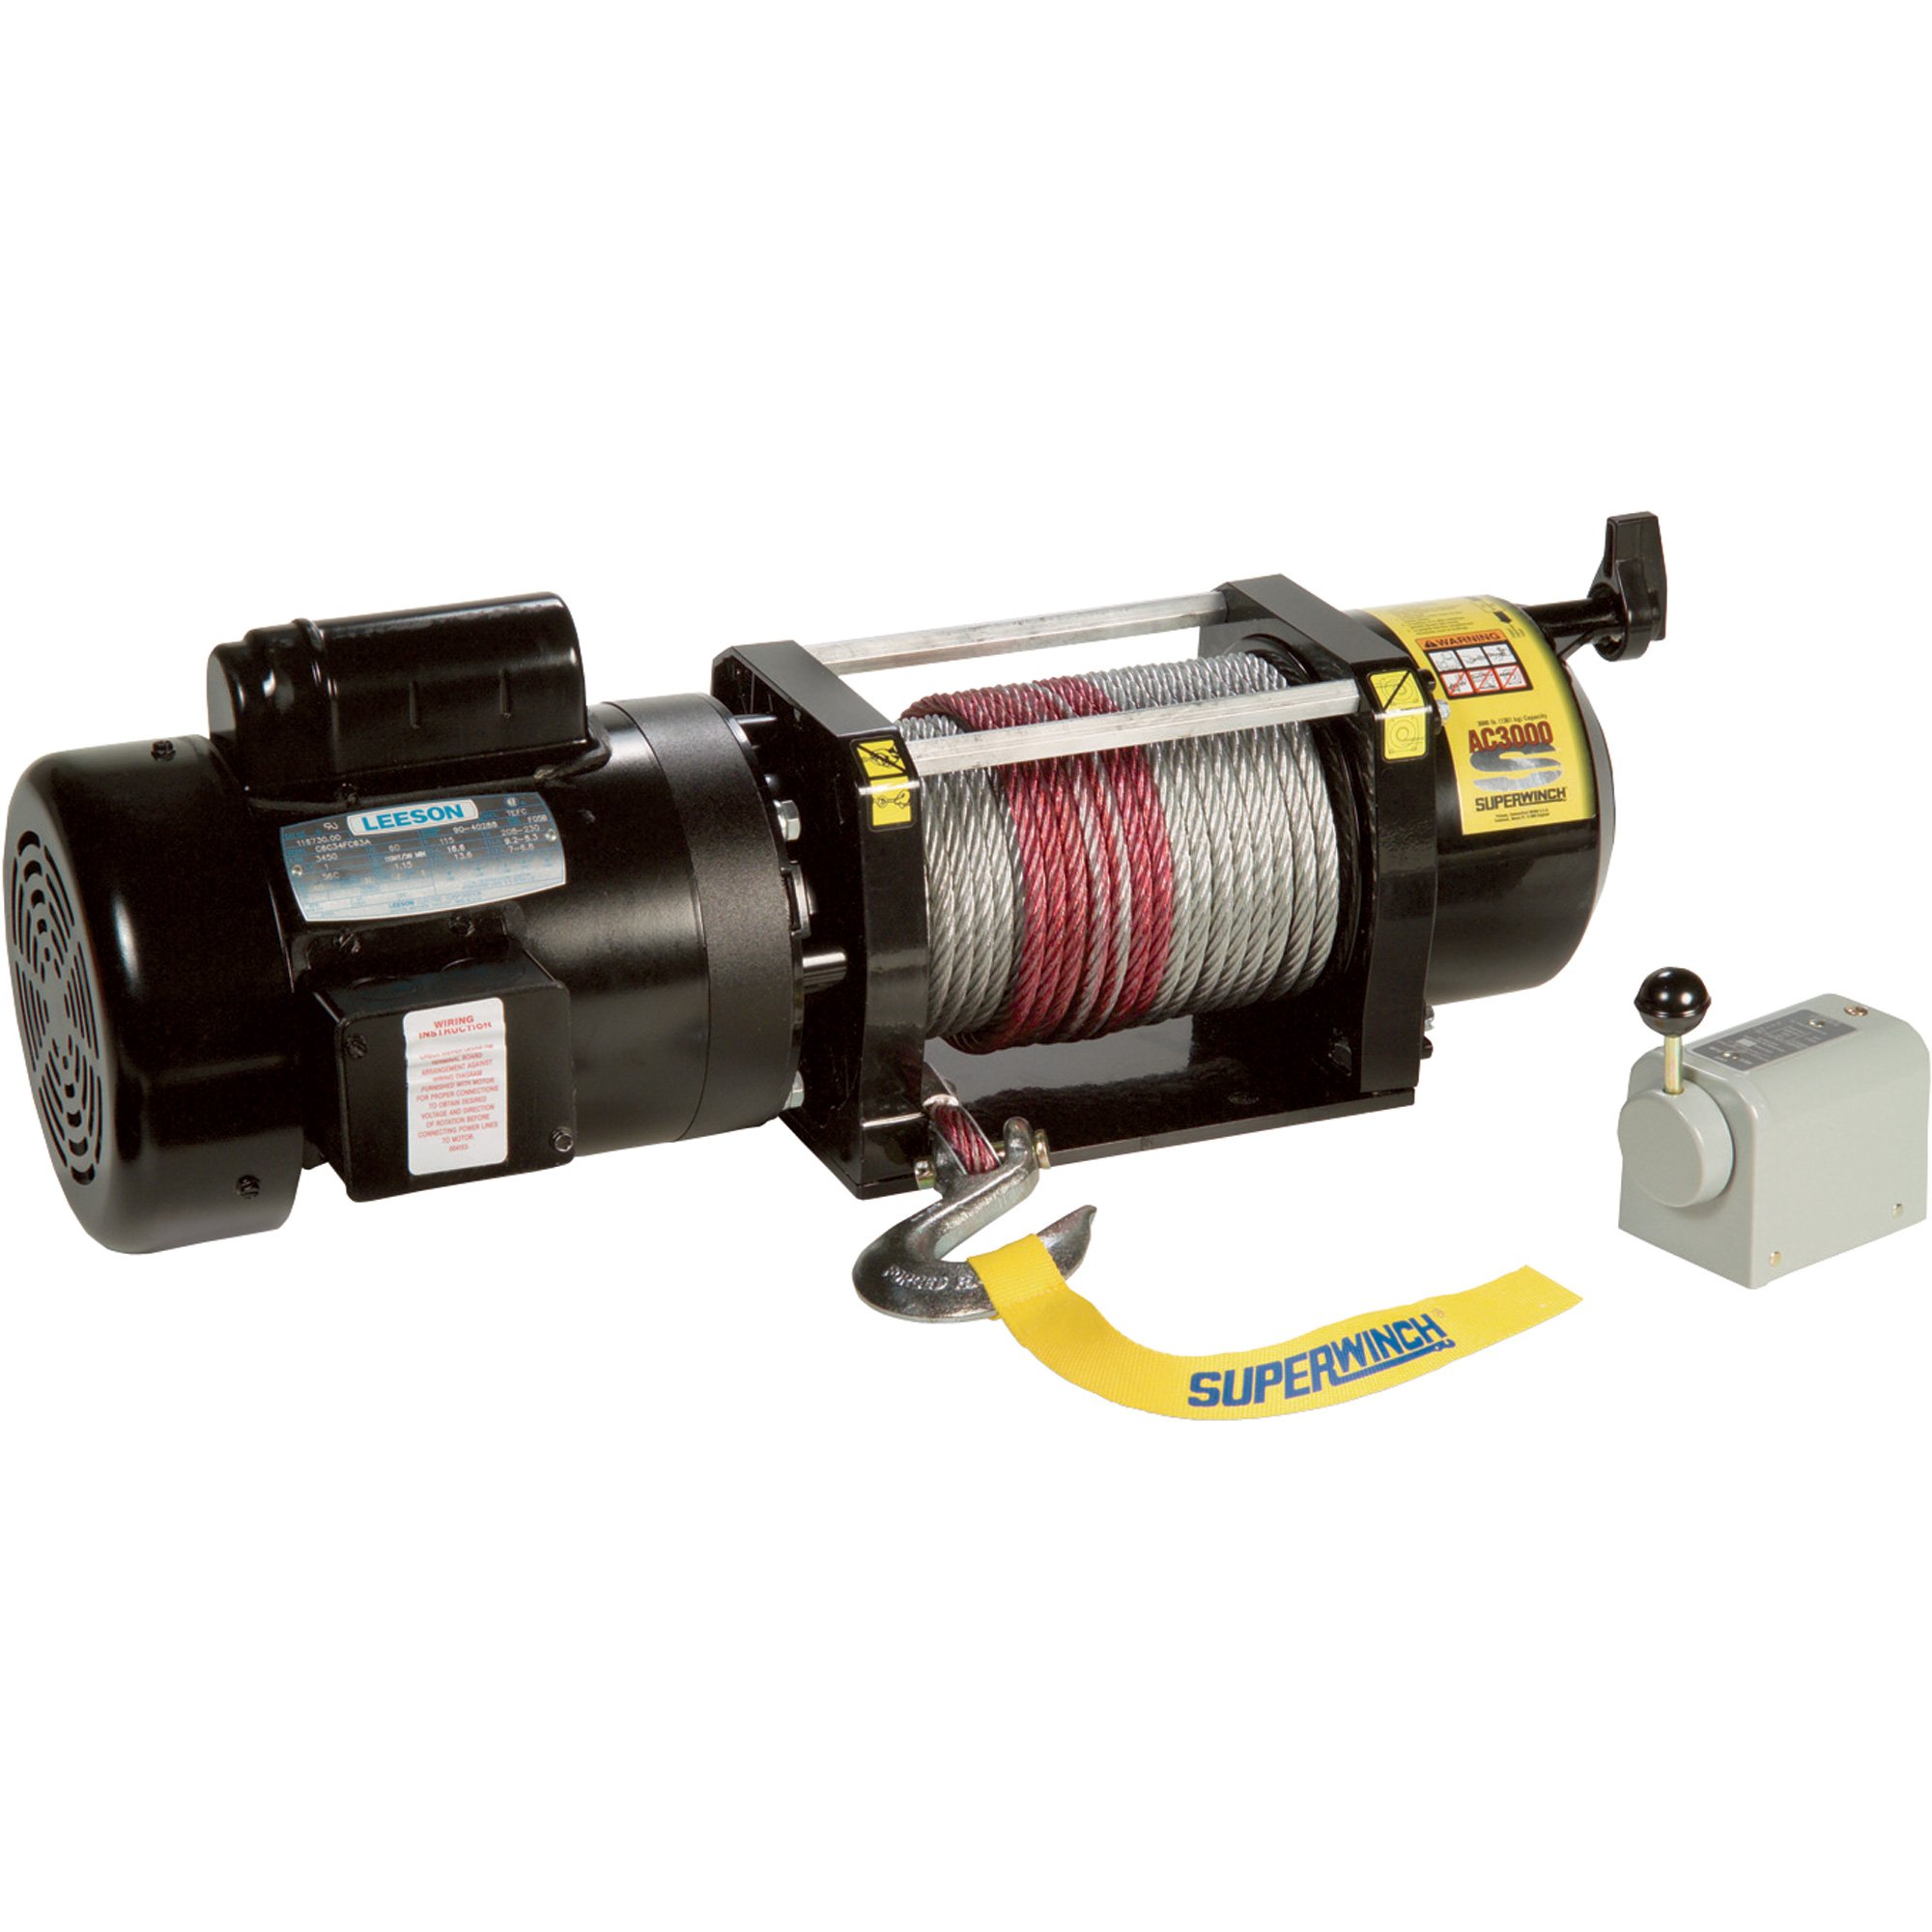 Superwinch 110/240 Volt AC Powered Electric Utility Winch — 3,000